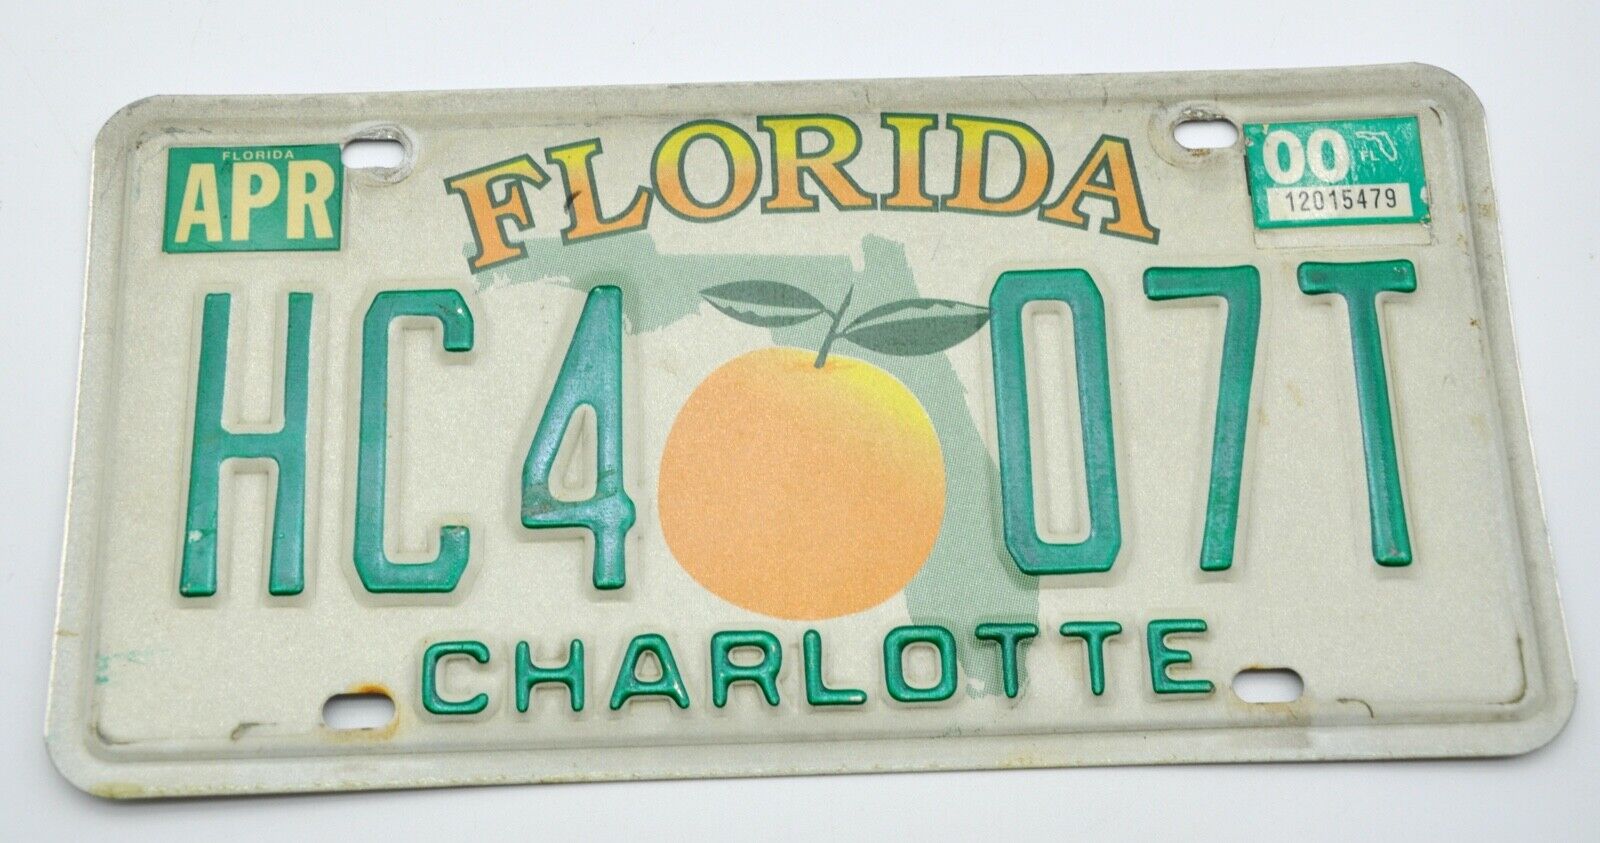 Florida 2000 Charlotte County License Plate, HC4 07T, Nice Quality, DMV Clear